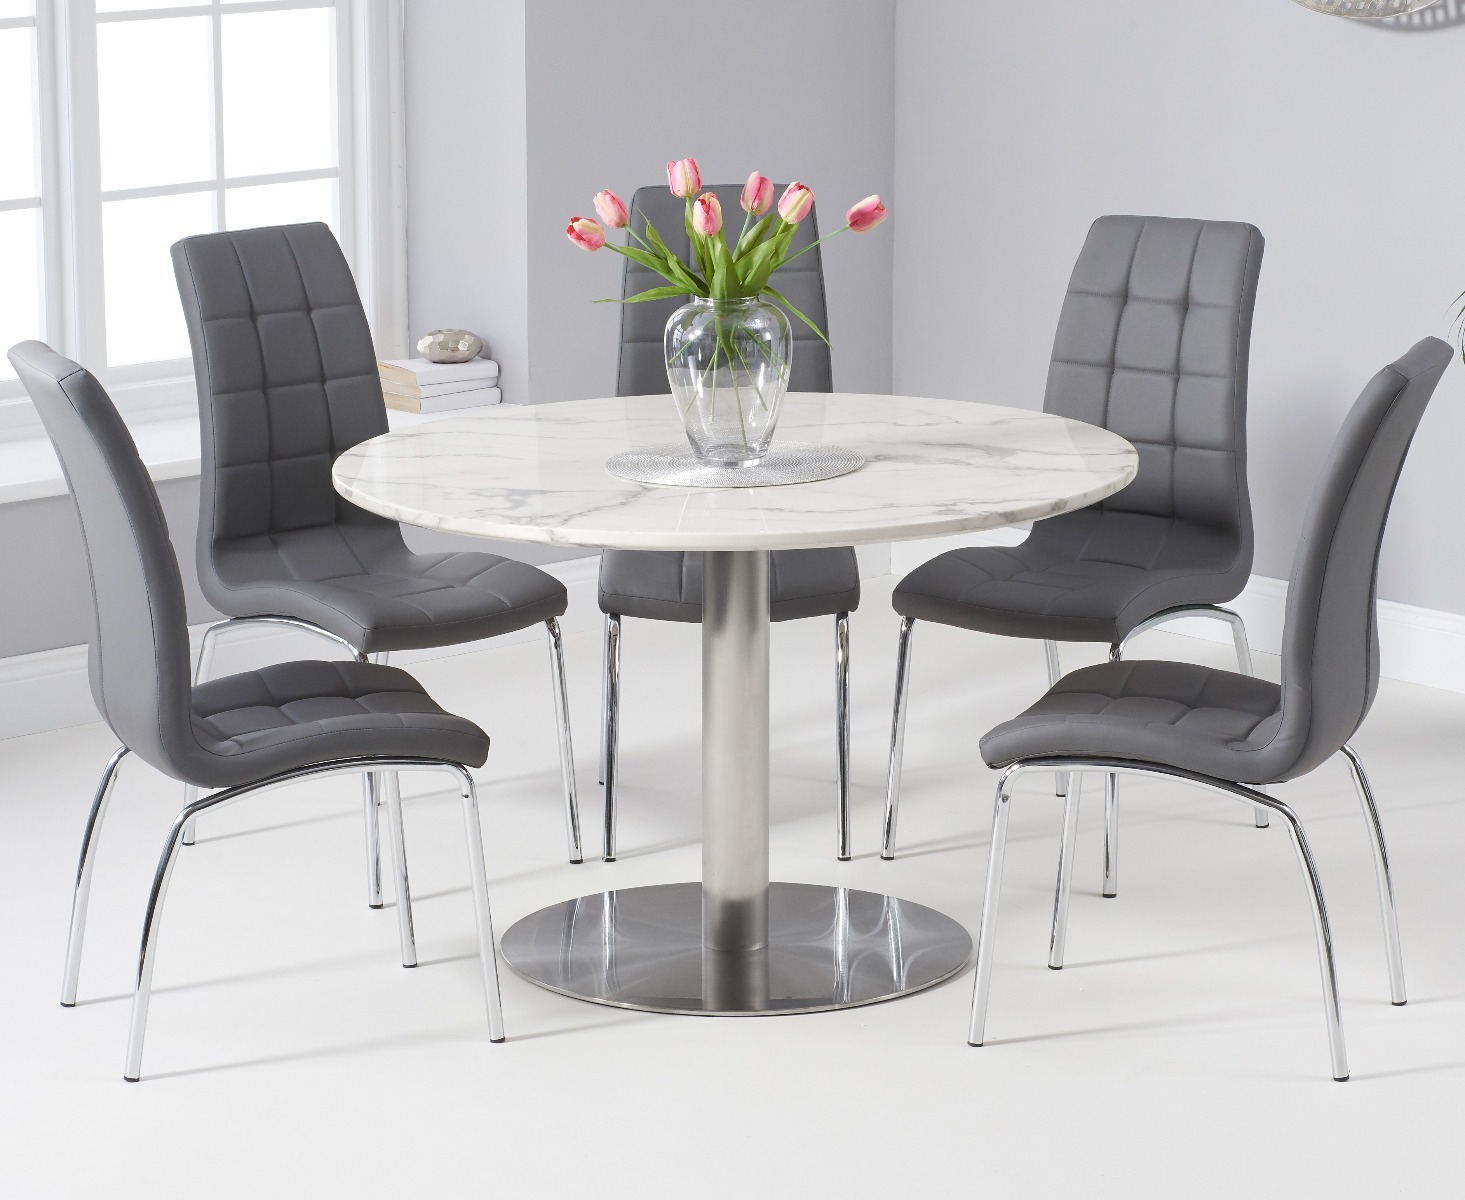 Bali 120cm Round White Marble Dining Table With Calgary Dining Chairs within sizing 1465 X 1200